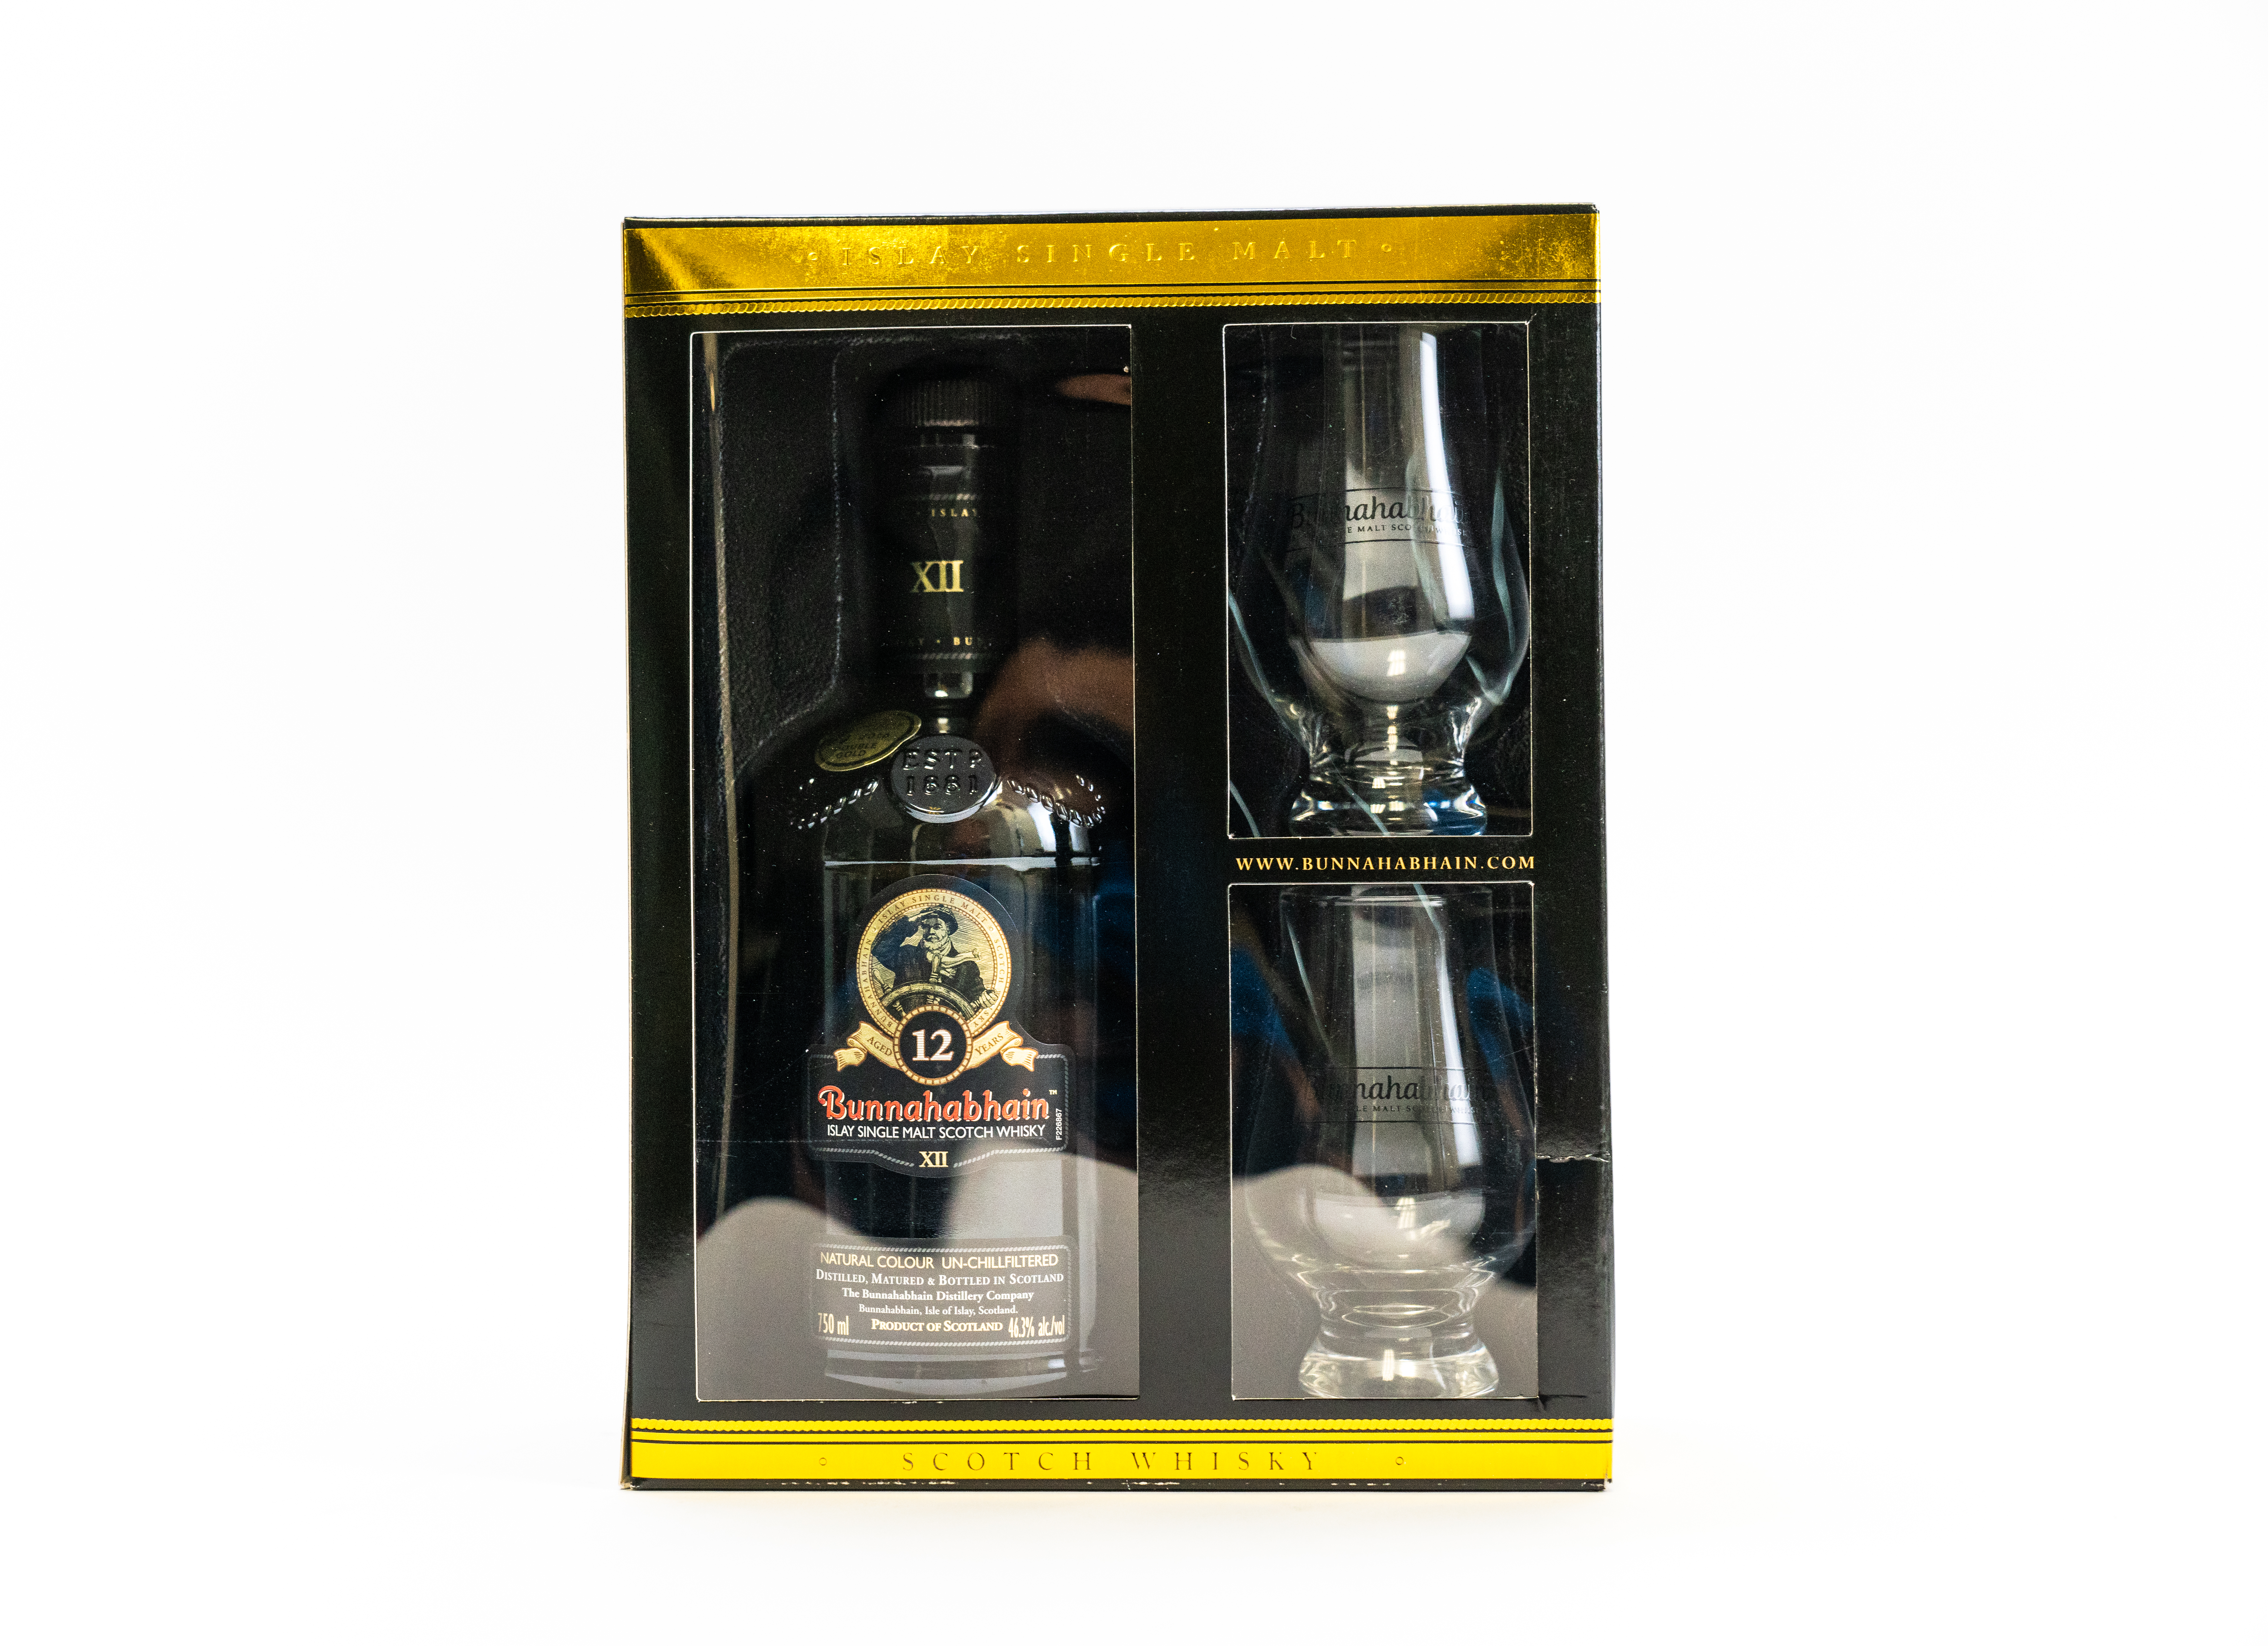 rum gift with purchase value added packaging